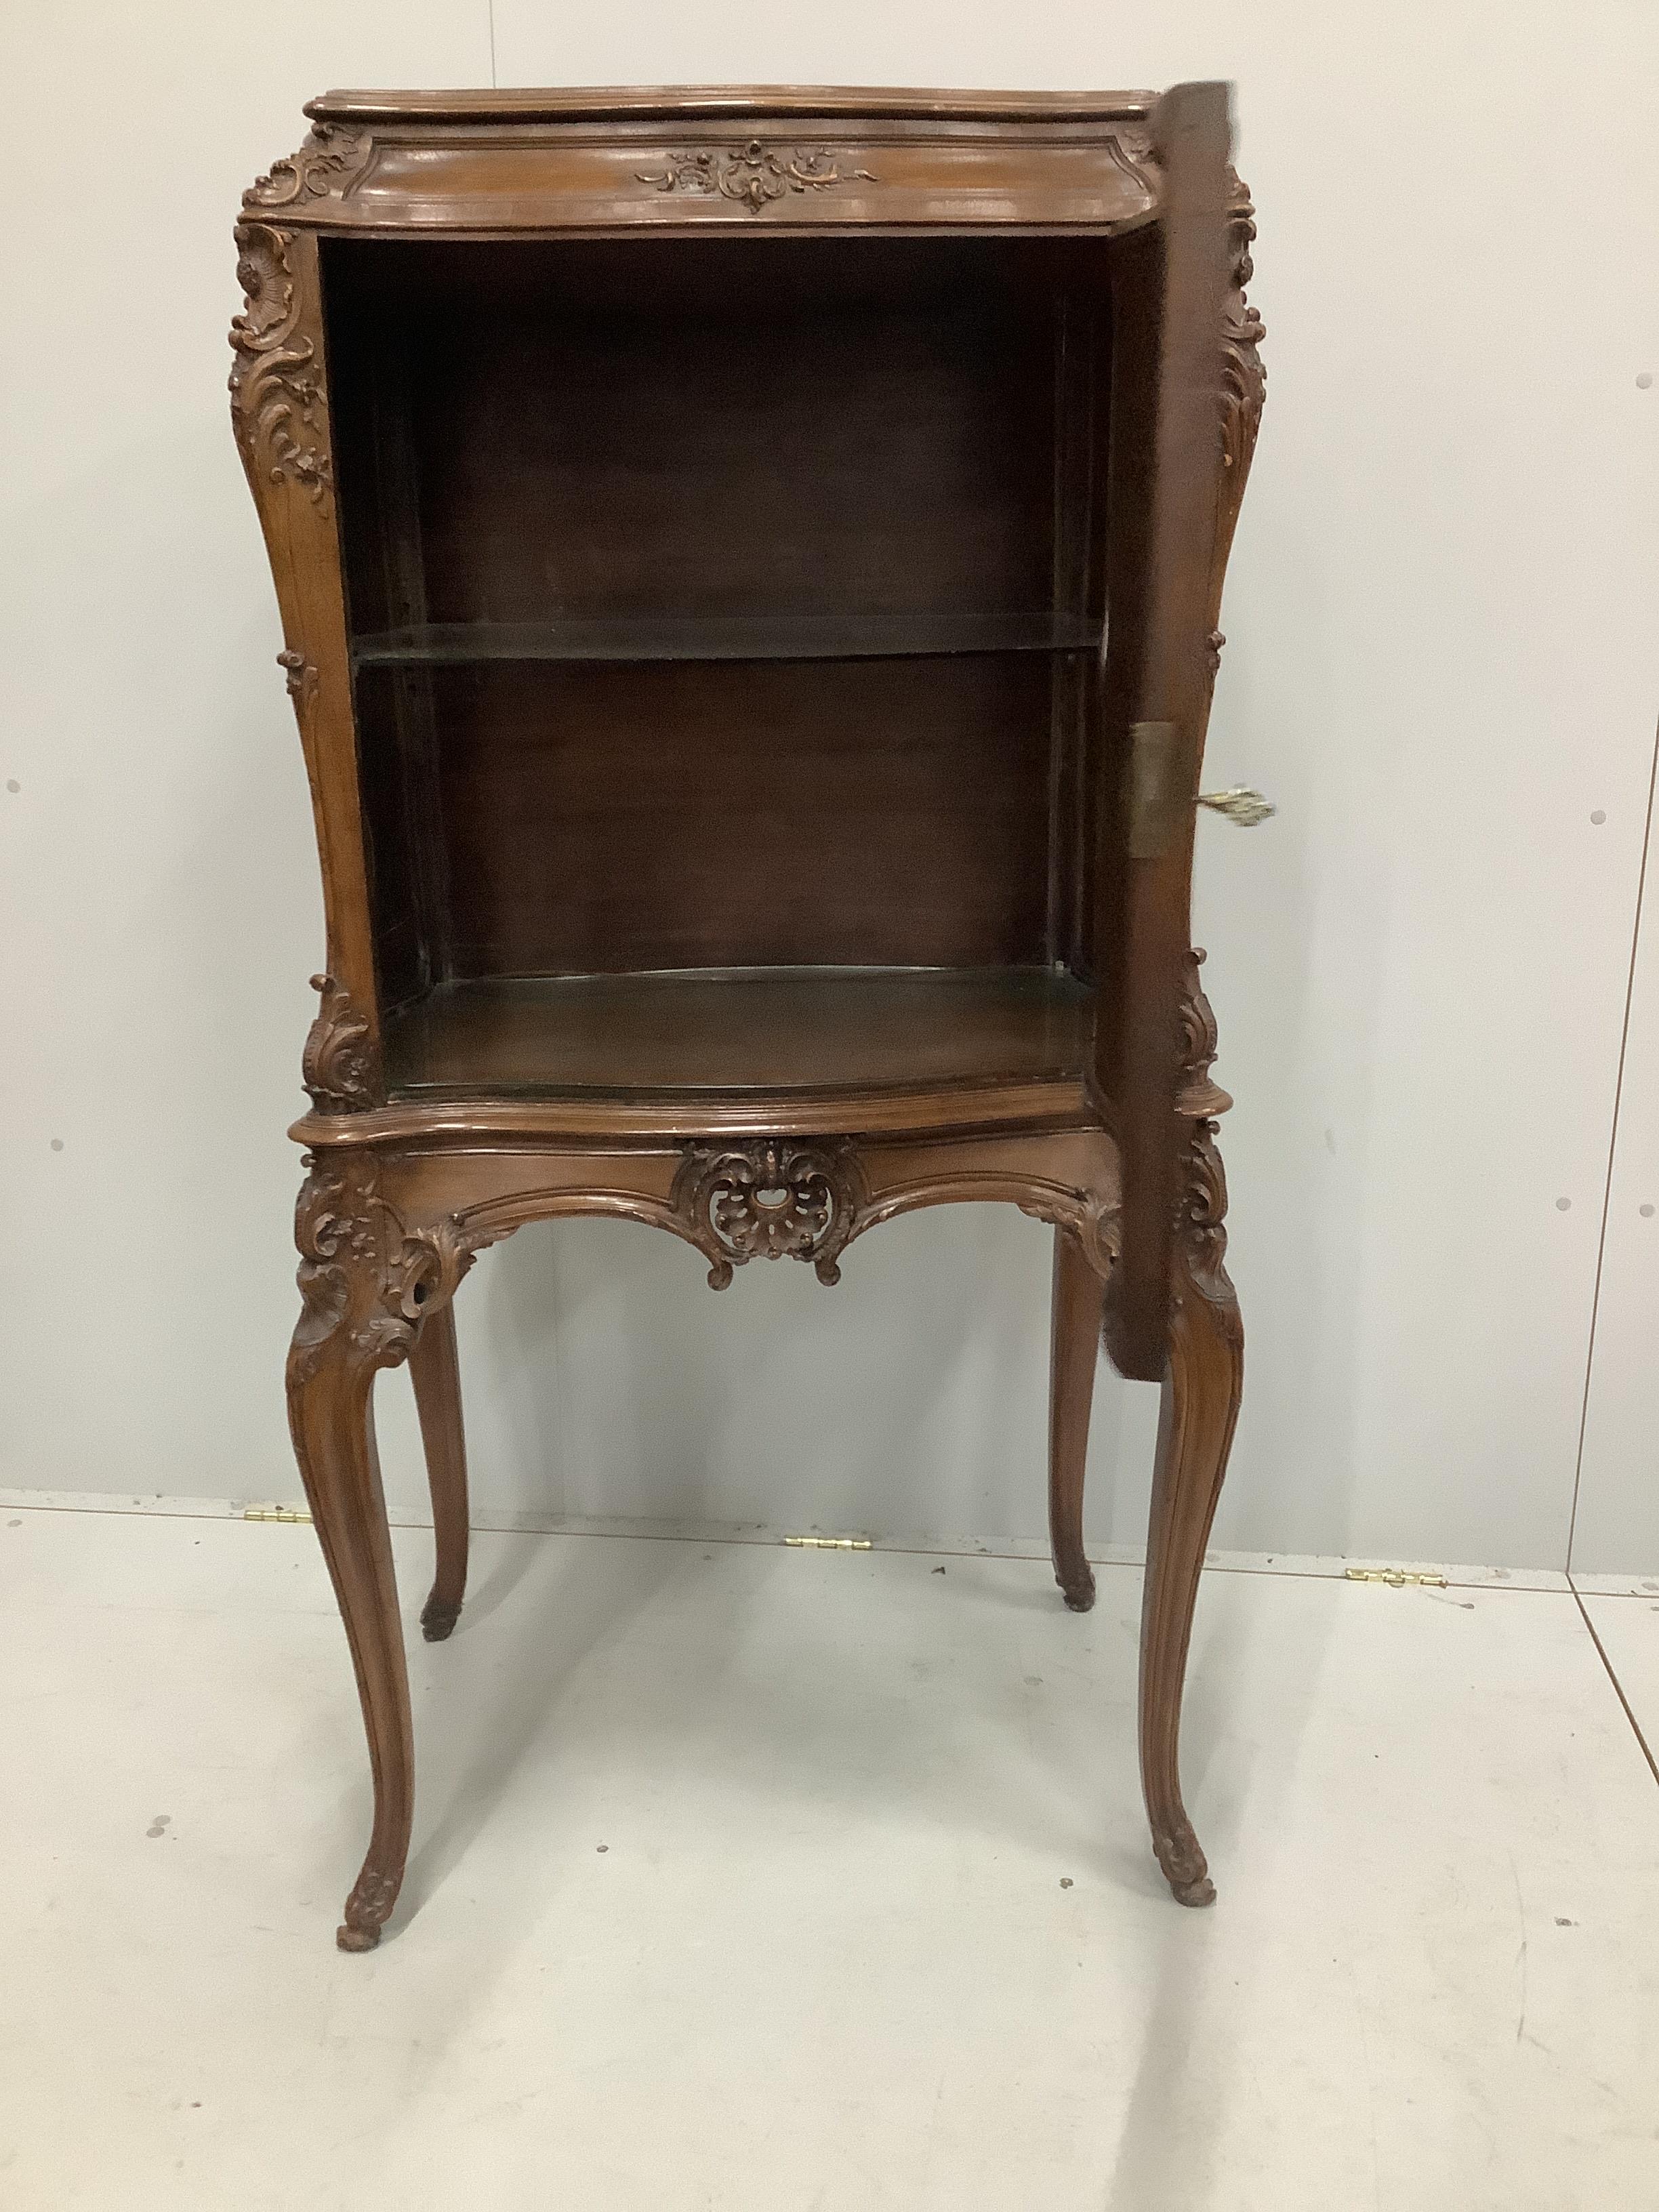 An early 20th century French mahogany side cabinet, width 74cm, depth 51cm, height 150cm